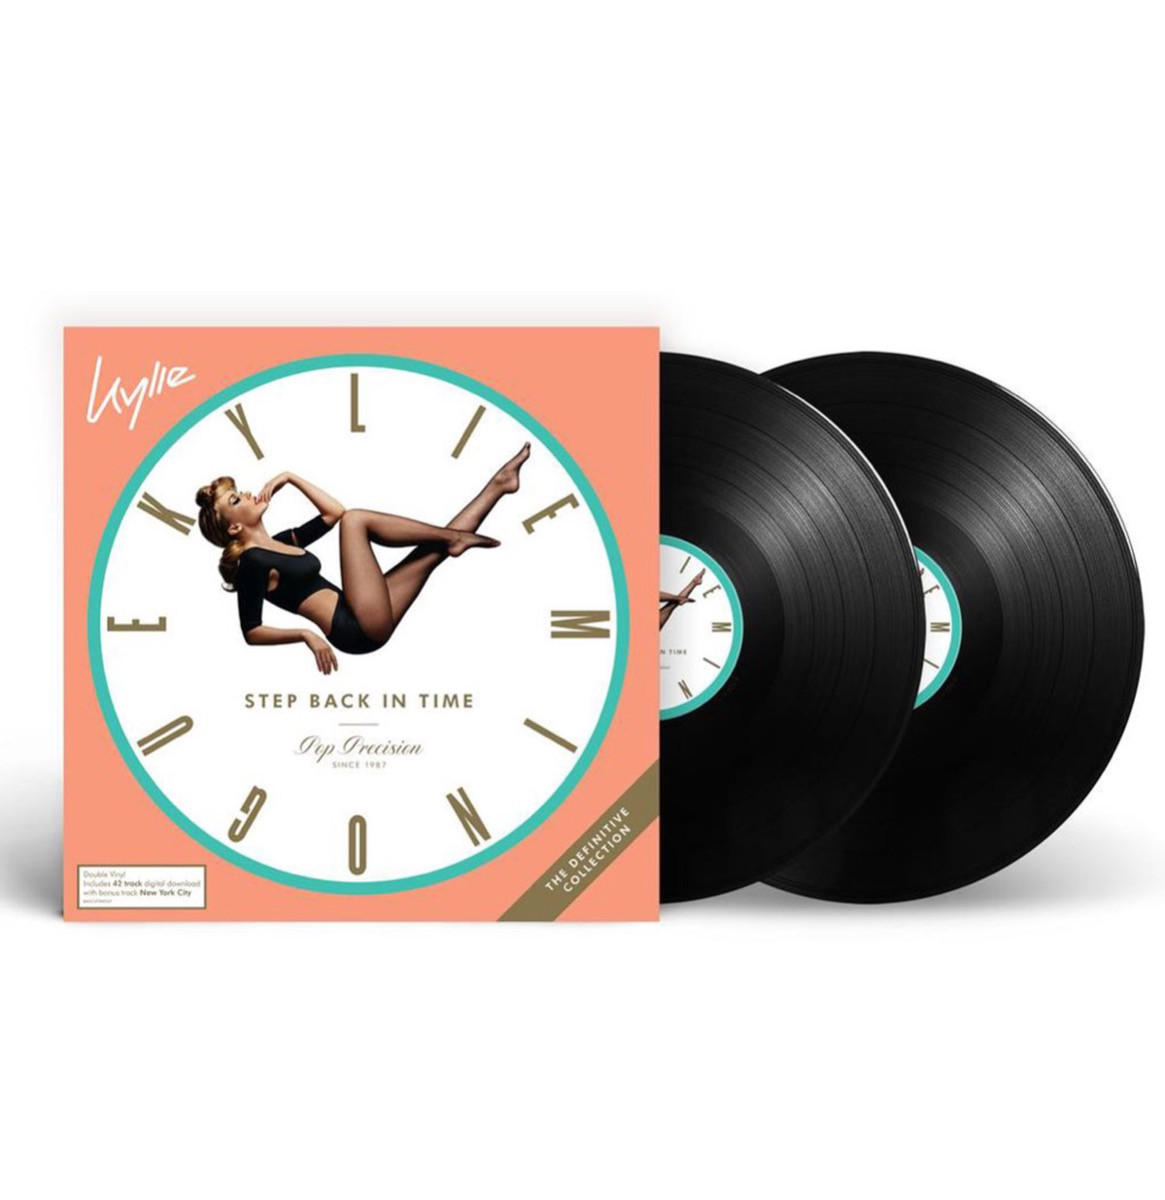 Kylie Minogue - Step Back In Time: The Definitive Collection 2LP